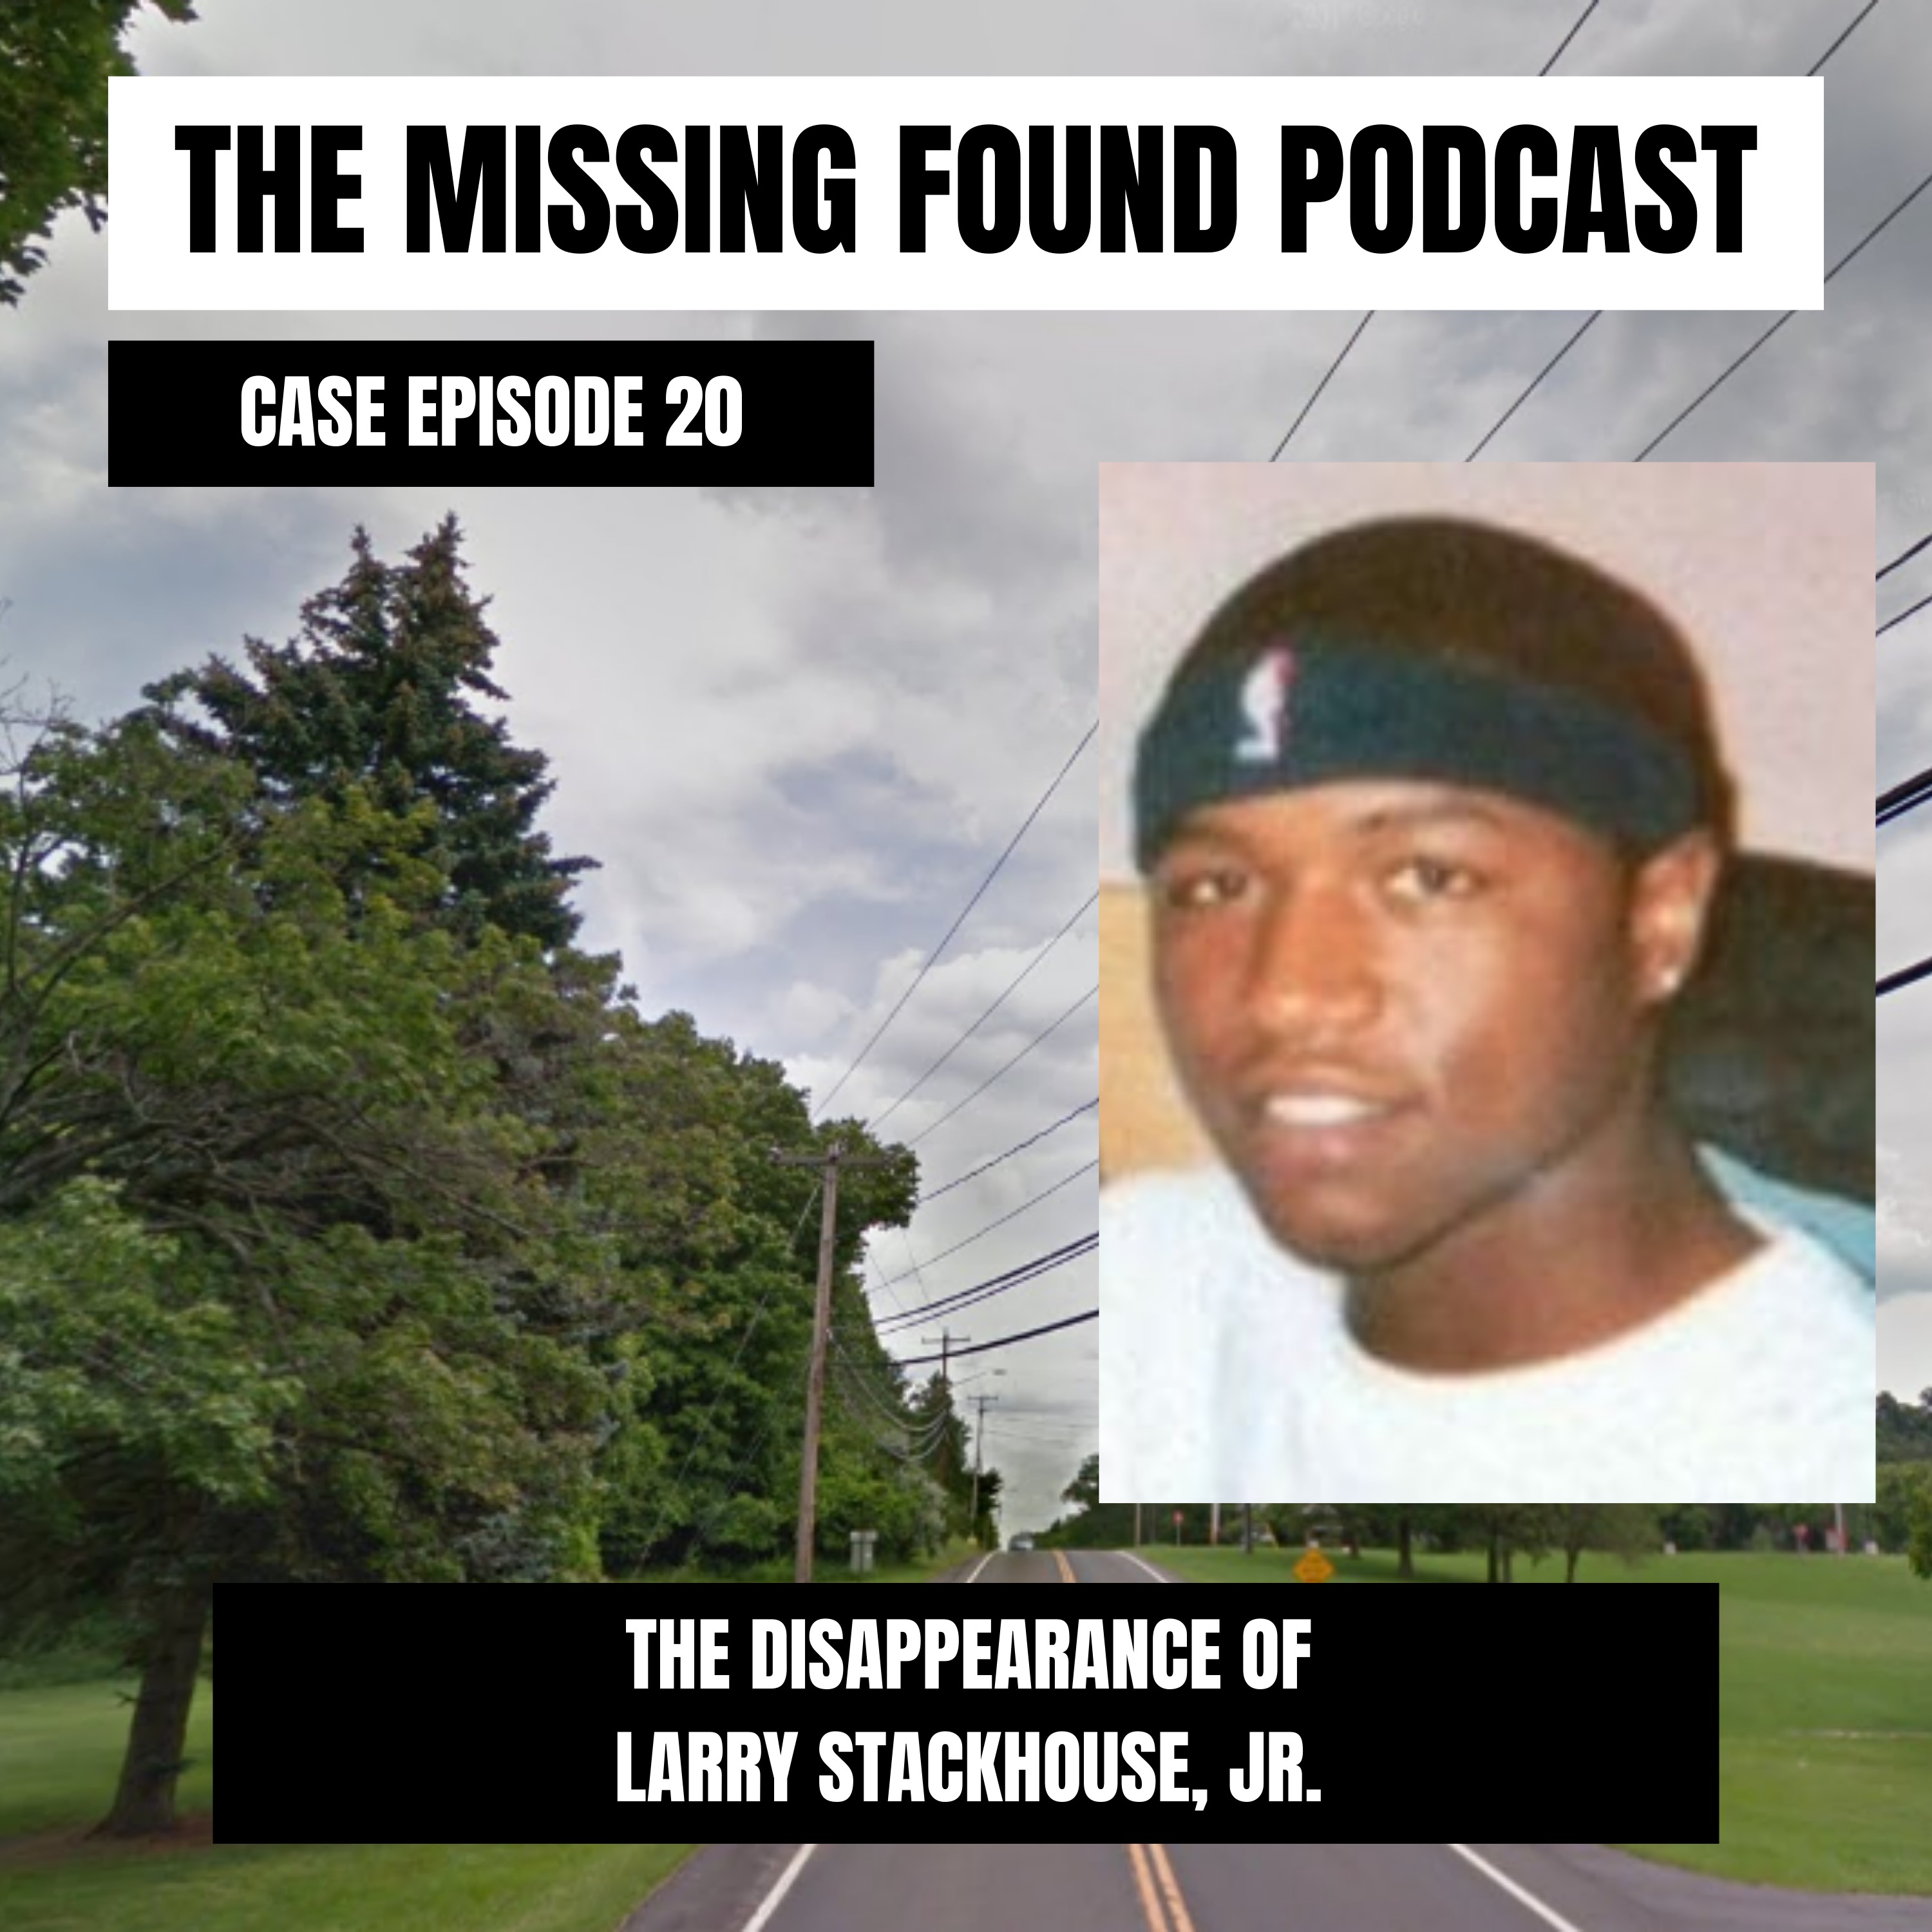 Case Episode 20 | Larry Stackhouse, Jr.: All Roads Lead to One Nation